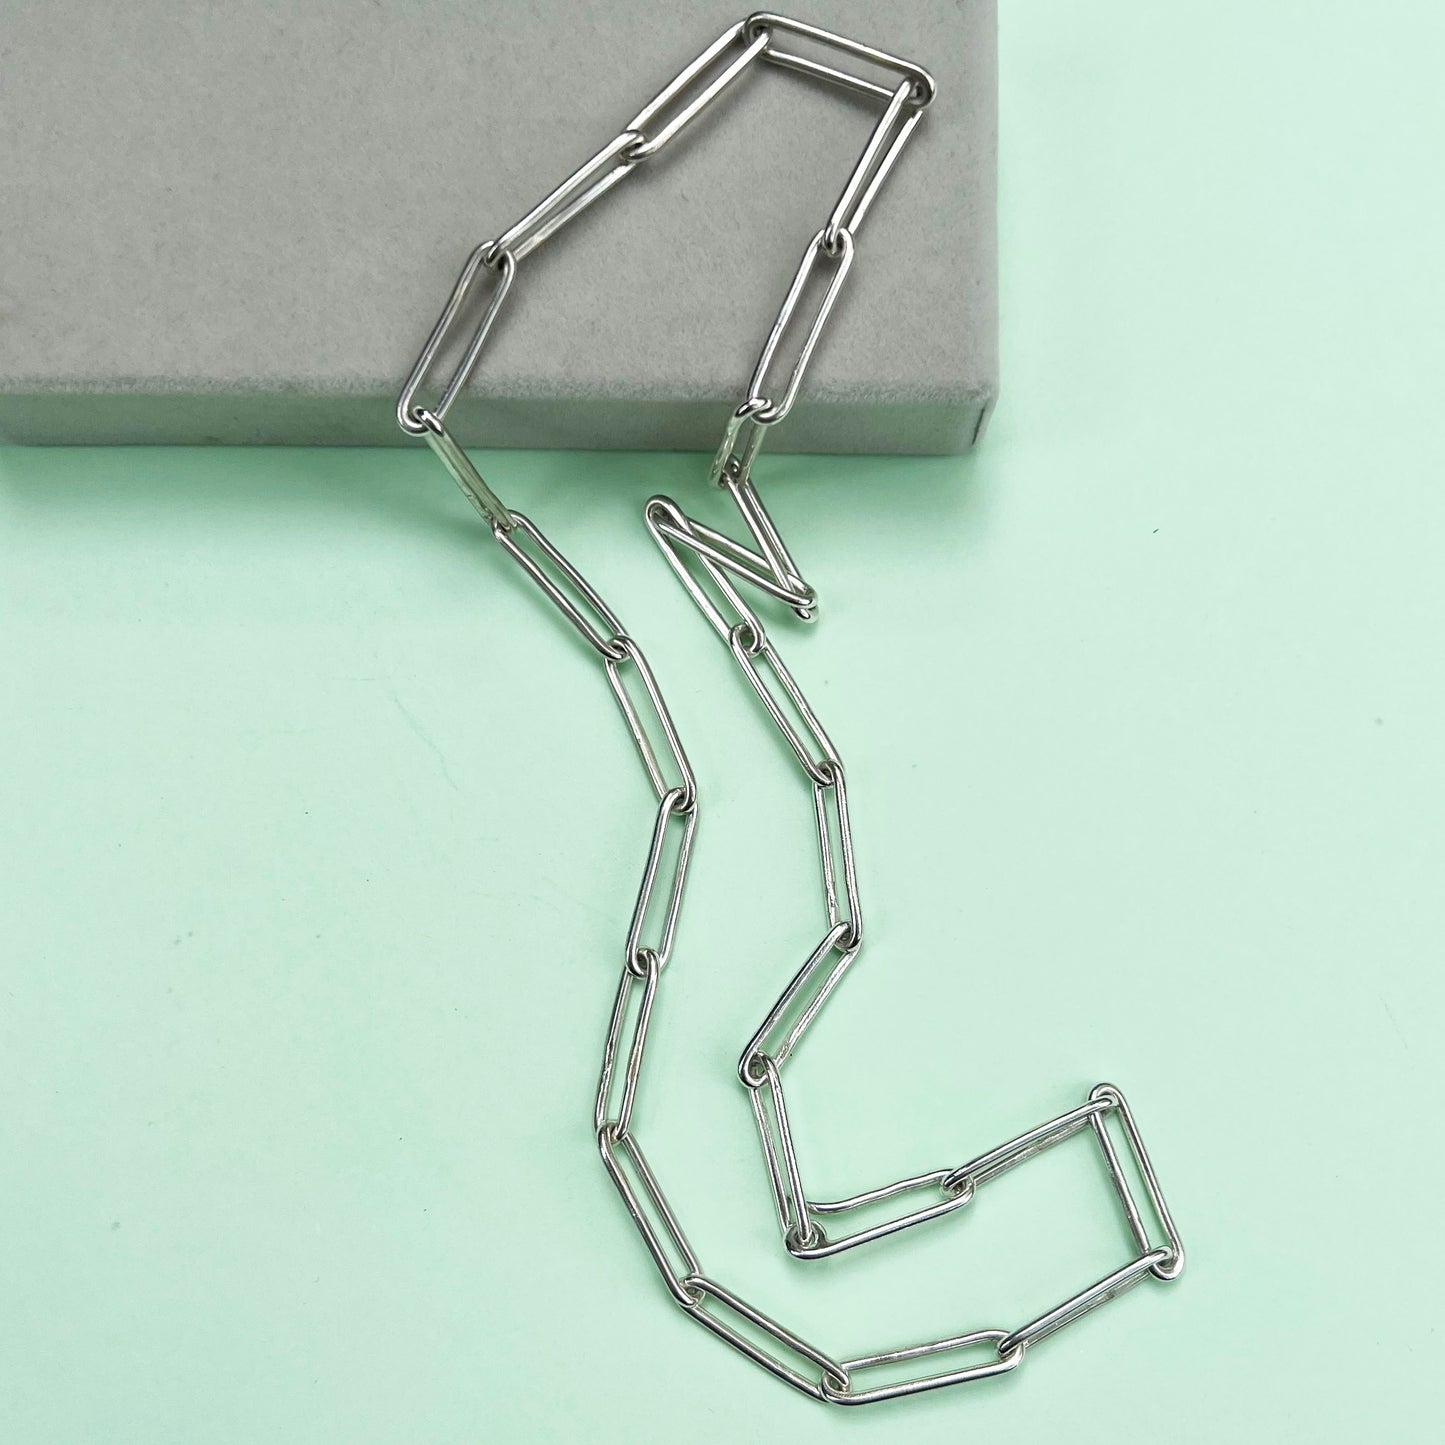  Chunky polished paperclip chain, Paperclip chain, LFW, London fashion week, London fashion week jewellery, polished silver paperclip chain, recycled silver, recycled silver paperclip chain, polished 20 inch paperclip chain